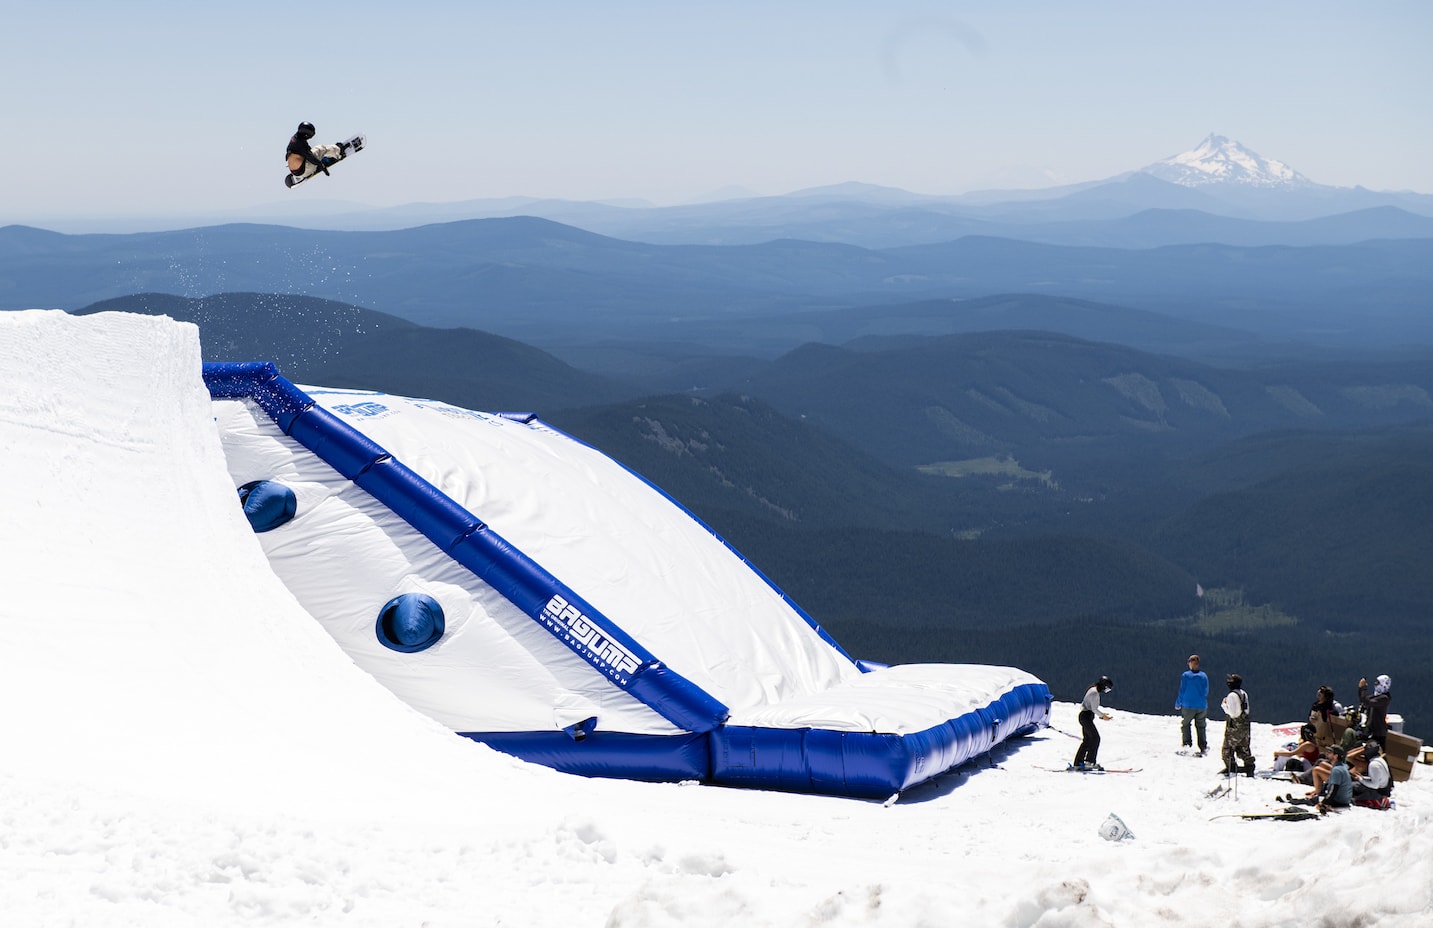 A skier does a trick high above an airbag on a snowy mountain